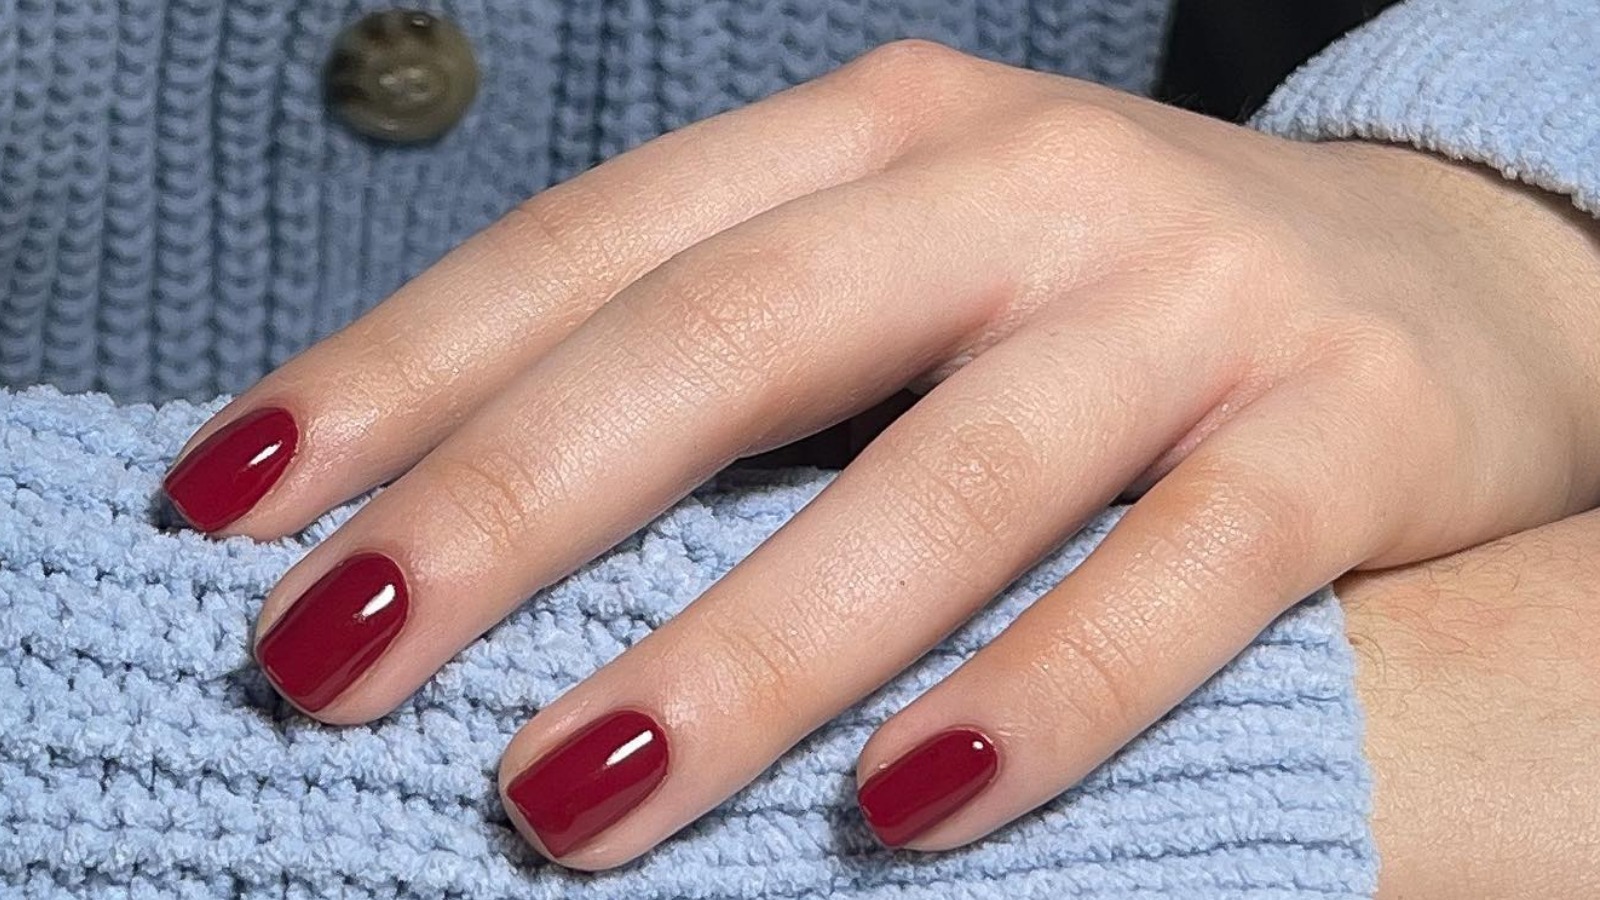 Bio Sculpture Nails May Just Be The Gentle Alternative To A Gel Manicure – The List